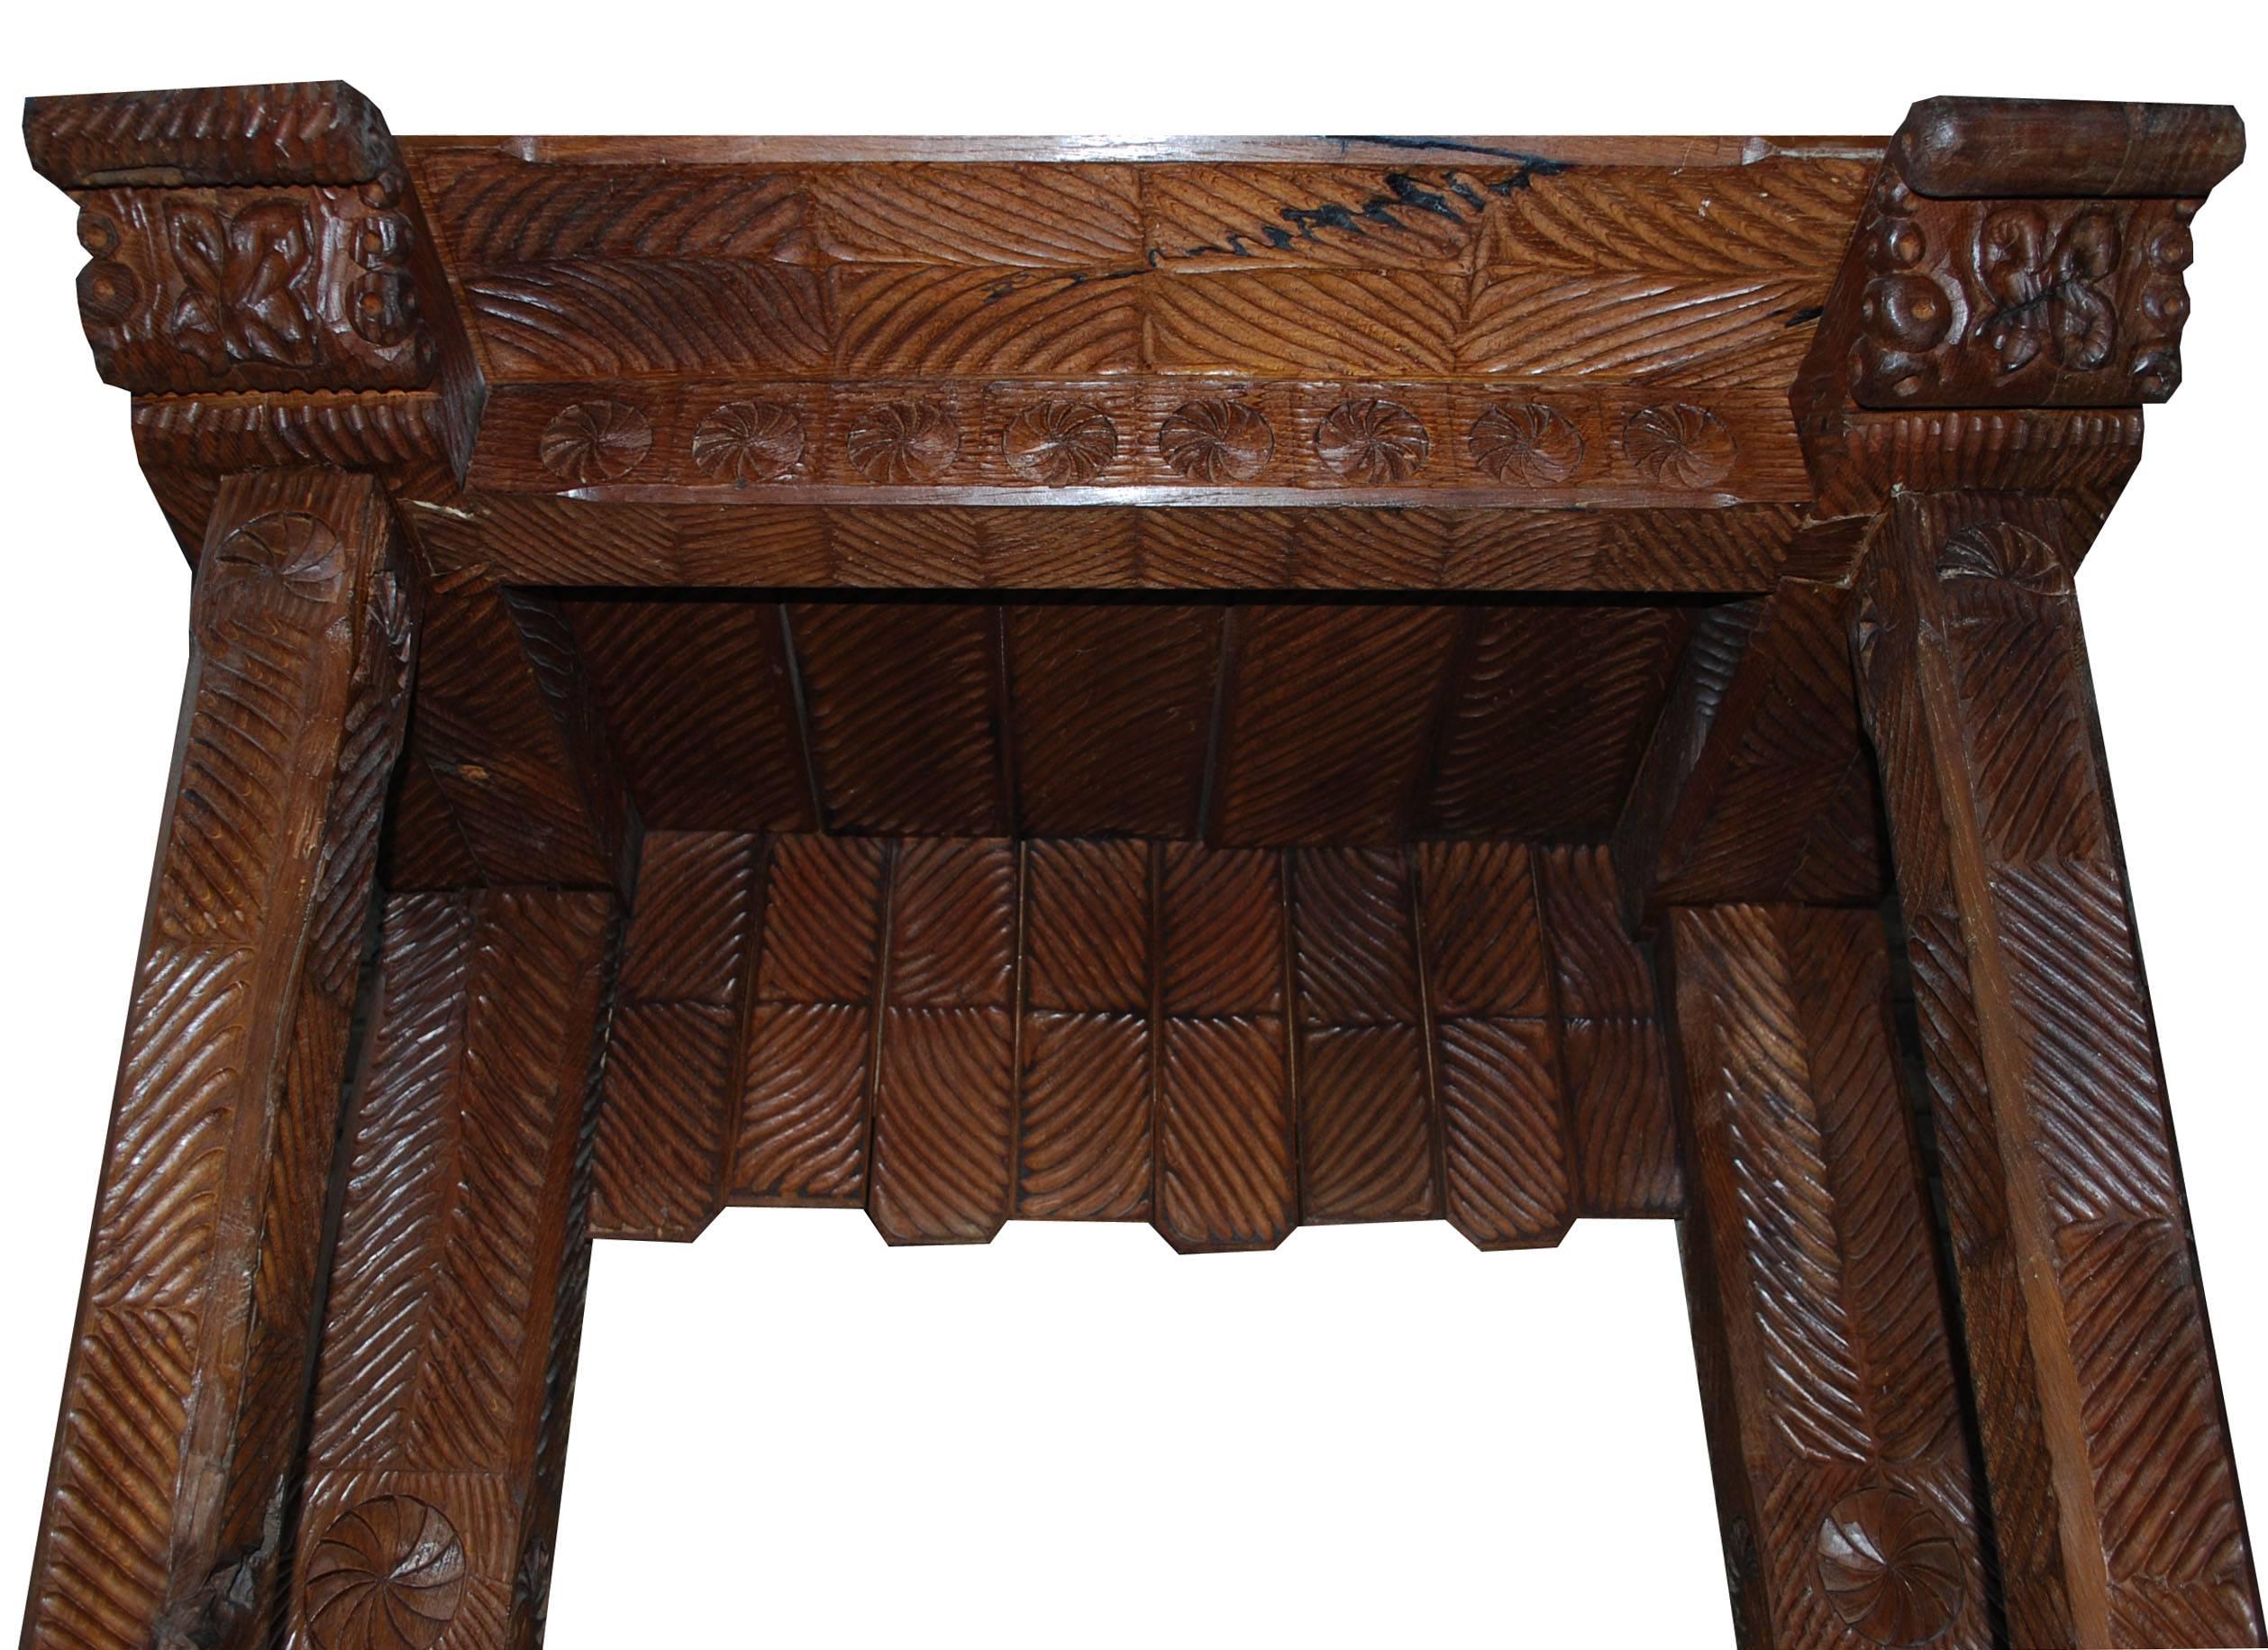 20th Century Hand-Carved Oakwood Fireplace Mantel In Good Condition For Sale In Casteren, NL